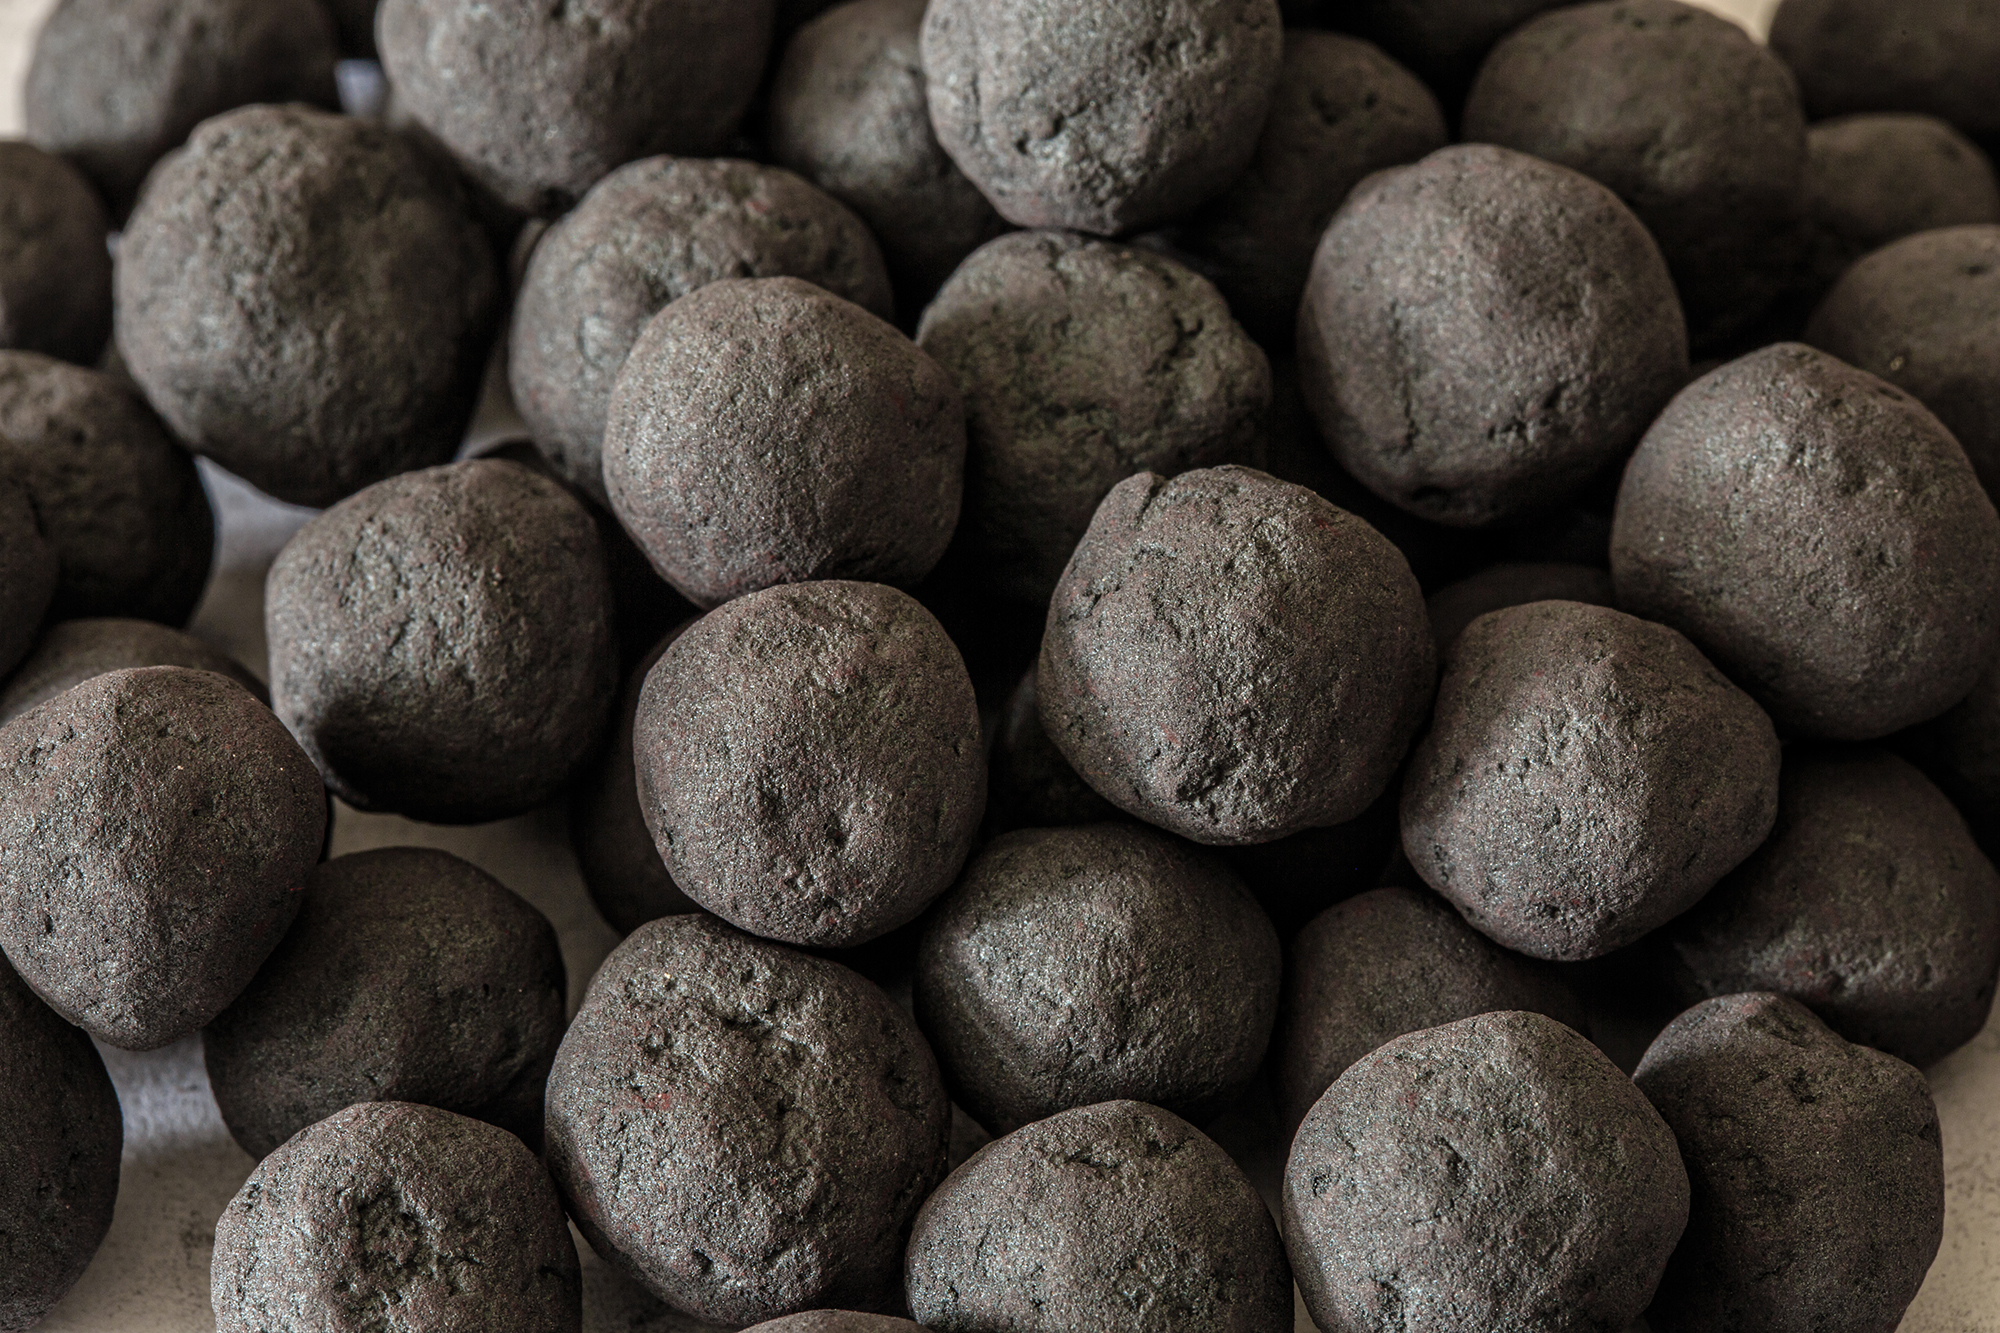 Numerous large spherical iron ore pellets used in steel production.